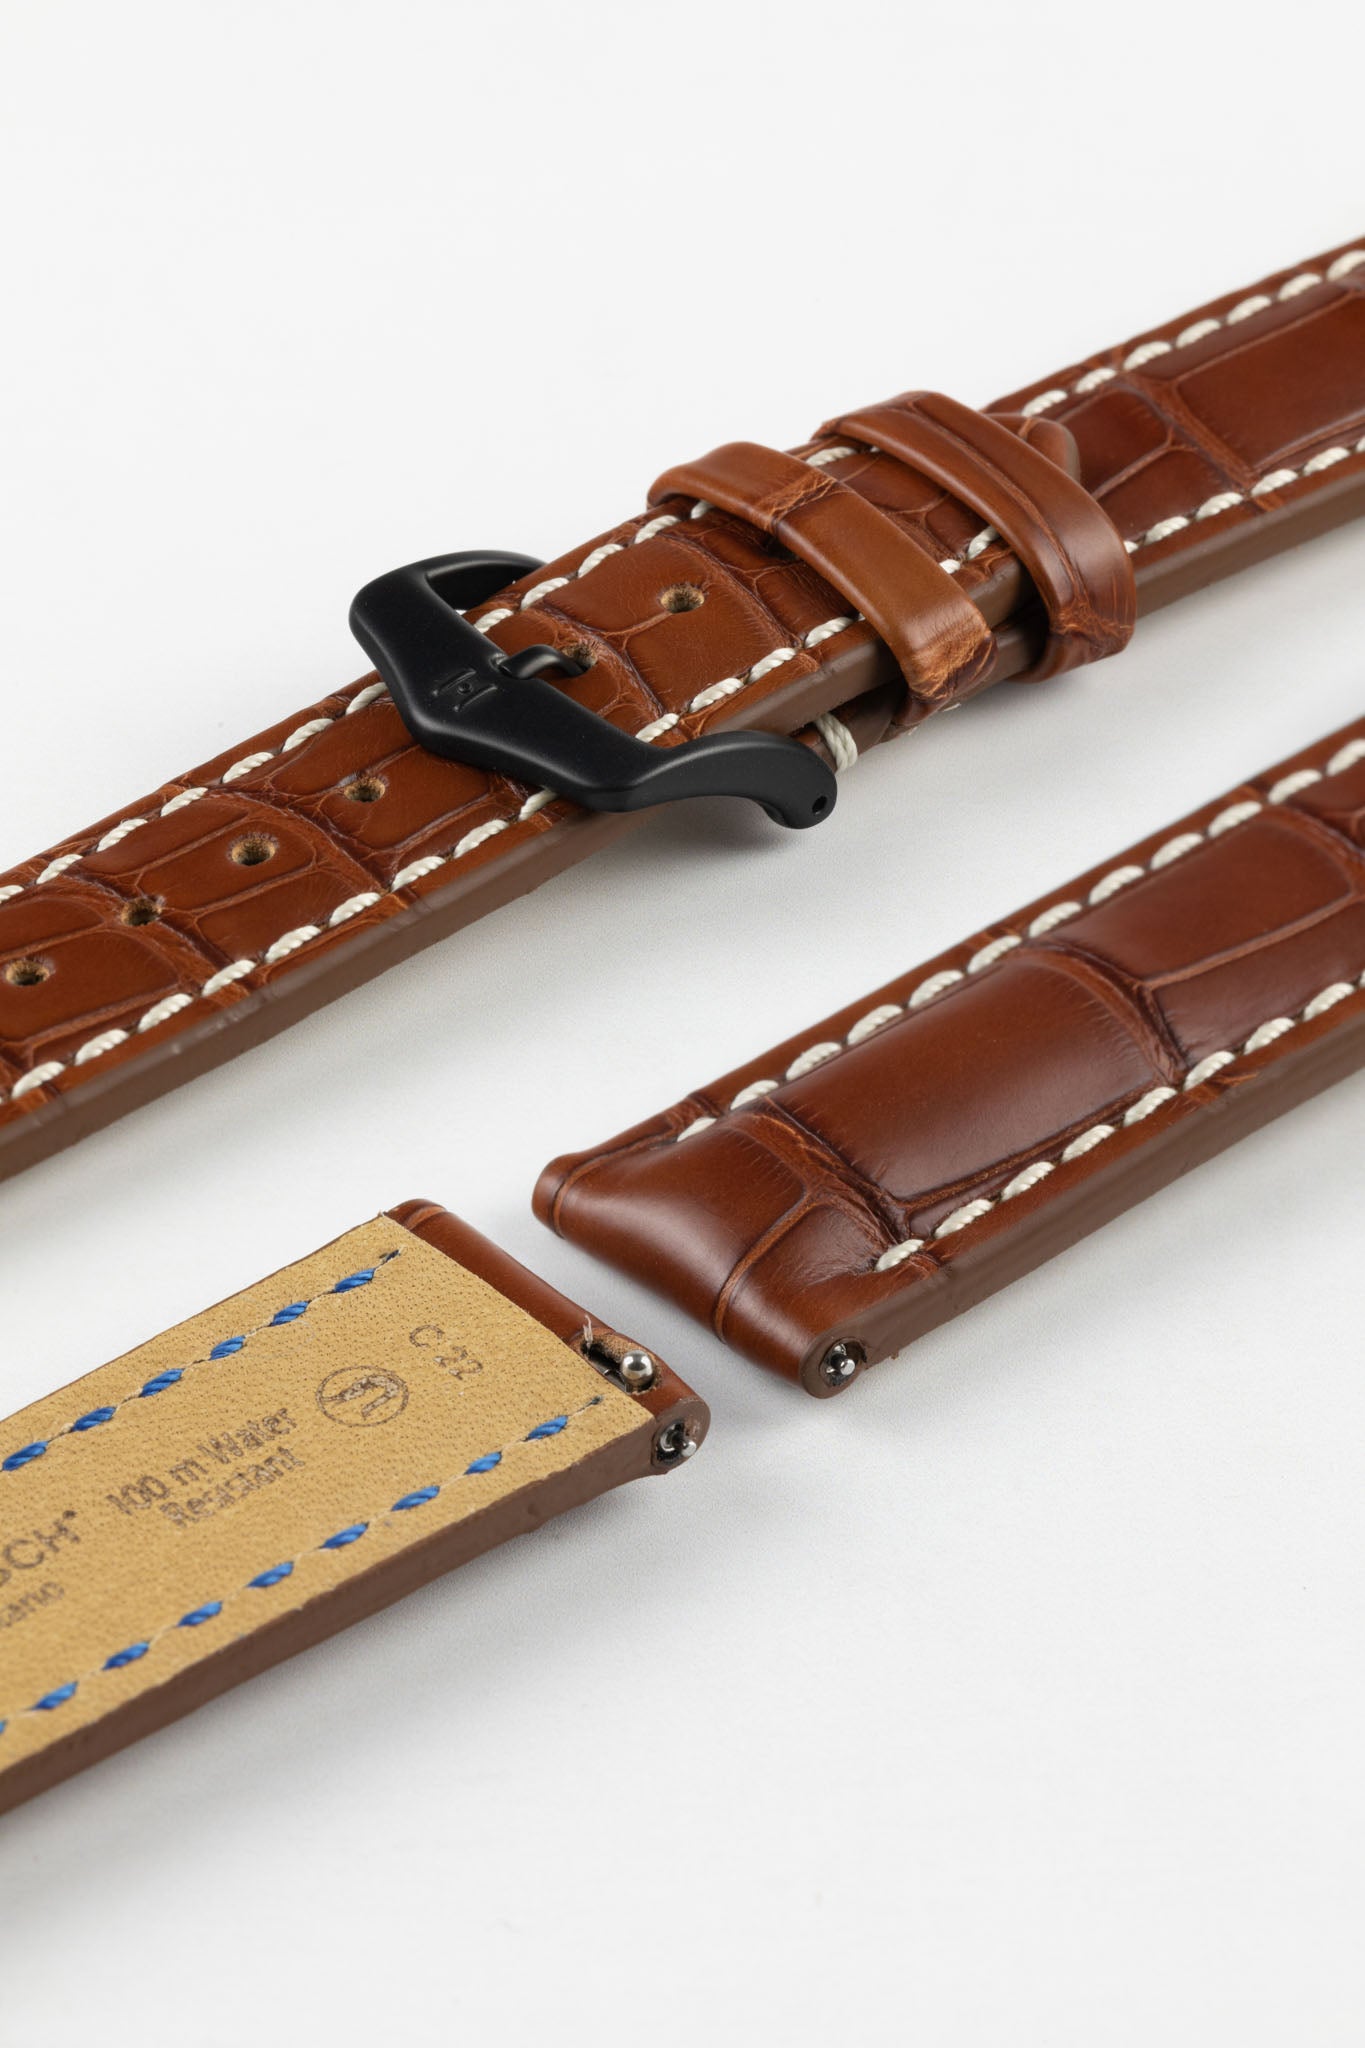 Hirsch CAPITANO Padded Alligator Leather Water-Resistant Watch Strap in GOLD BROWN